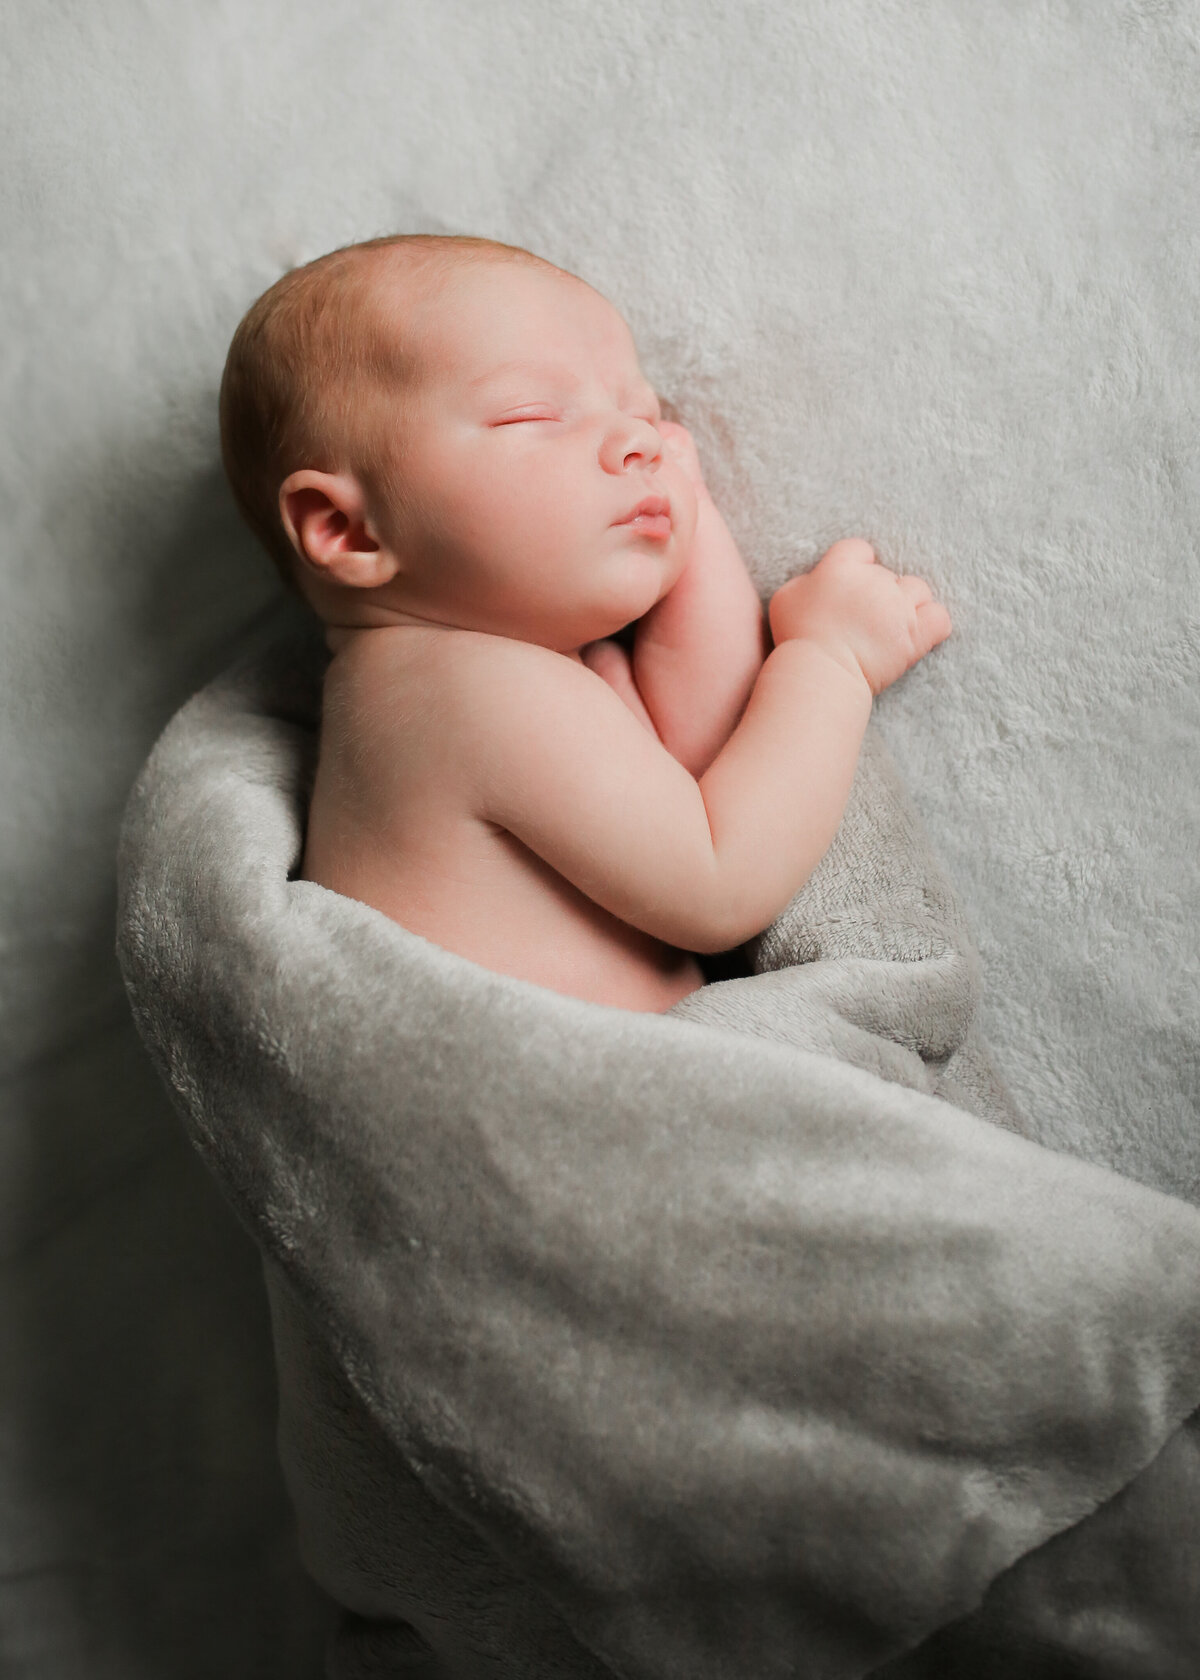 A perfect gift for new parents, a gift voucher for a newborn photo shoot.